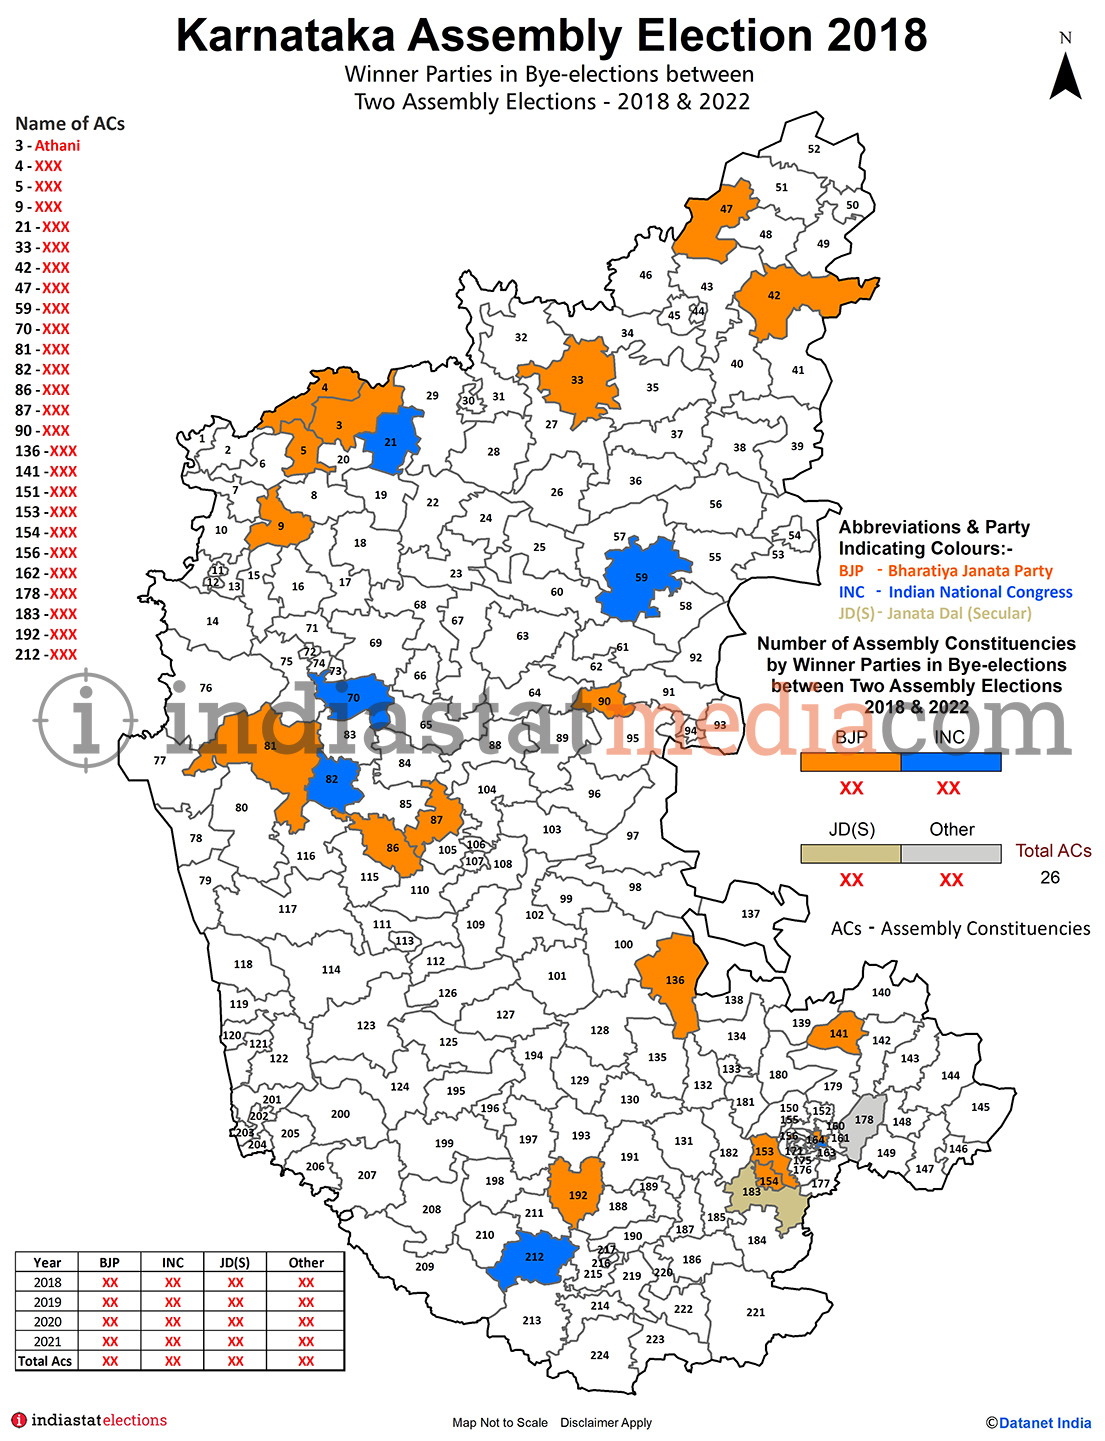 Winner Parties in Bye-elections between Two Assembly Elections in Karnataka (2018 & 2022)